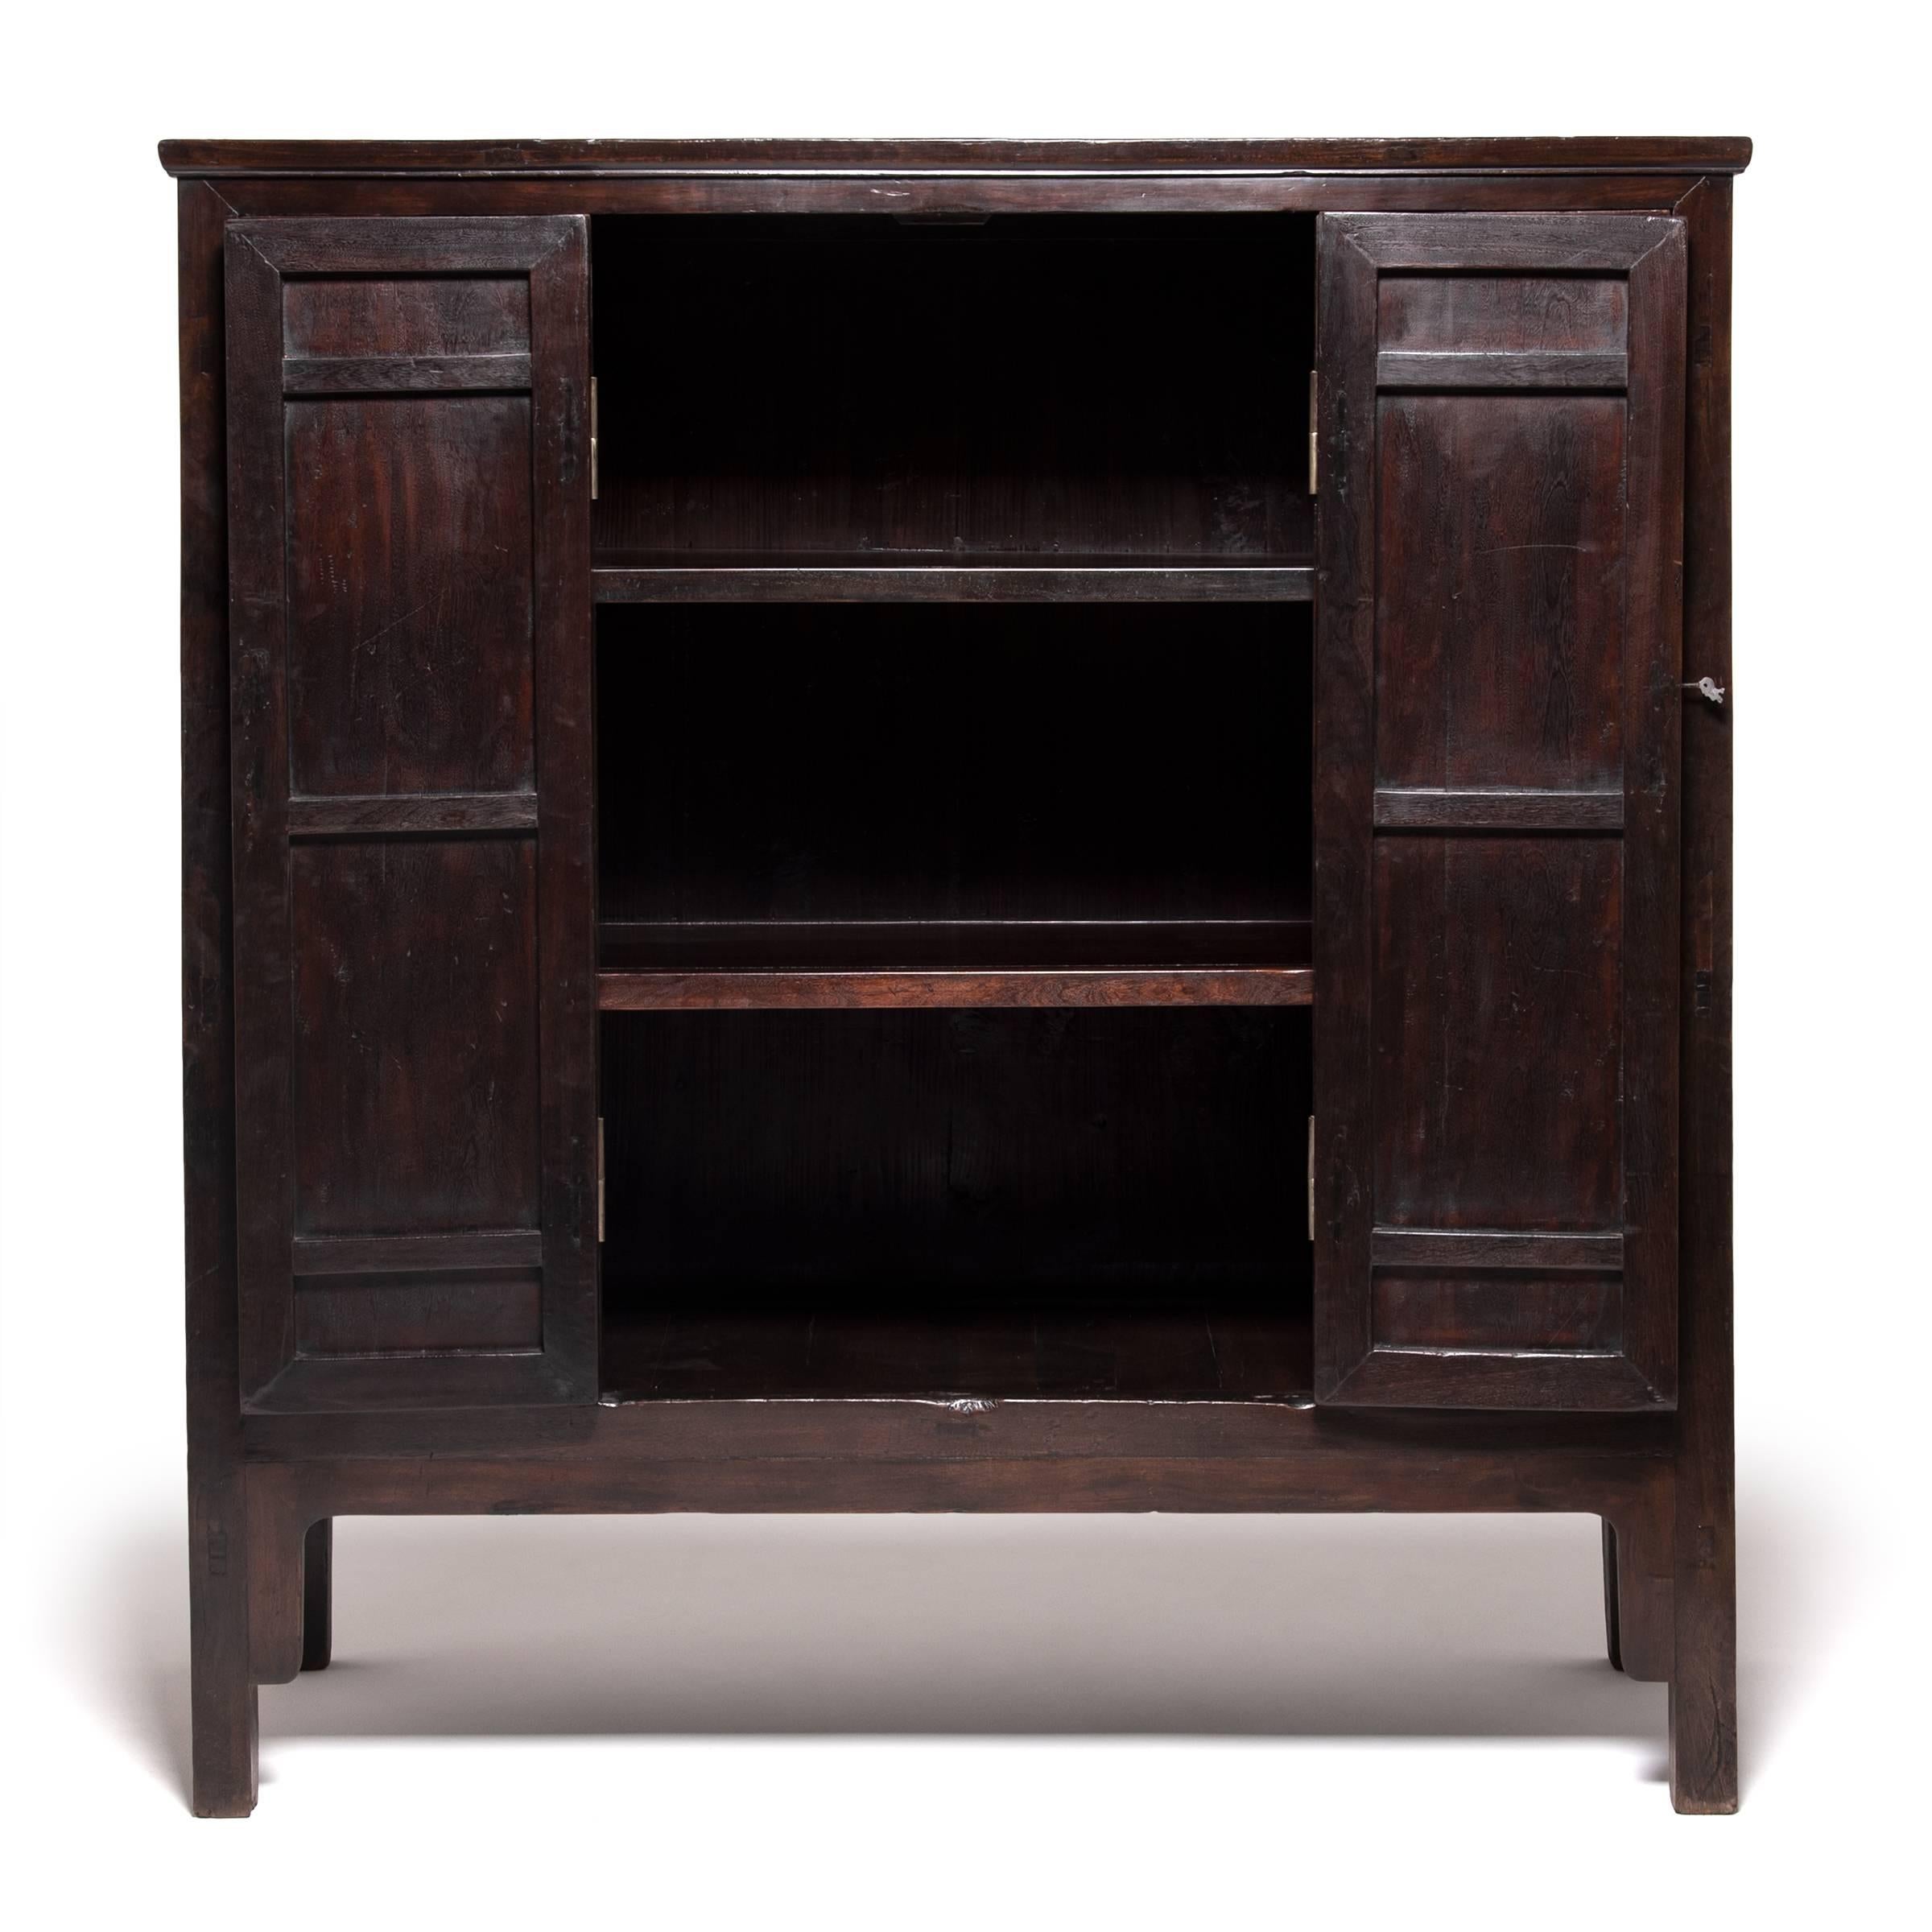 This very fine 19th century cabinet from Northern China is made of ironwood. Iron wood, known in Mandarin as Tieli and prized by collectors, comes from the tallest Chinese hardwood tree and is very durable with a coarse texture and distinctive open